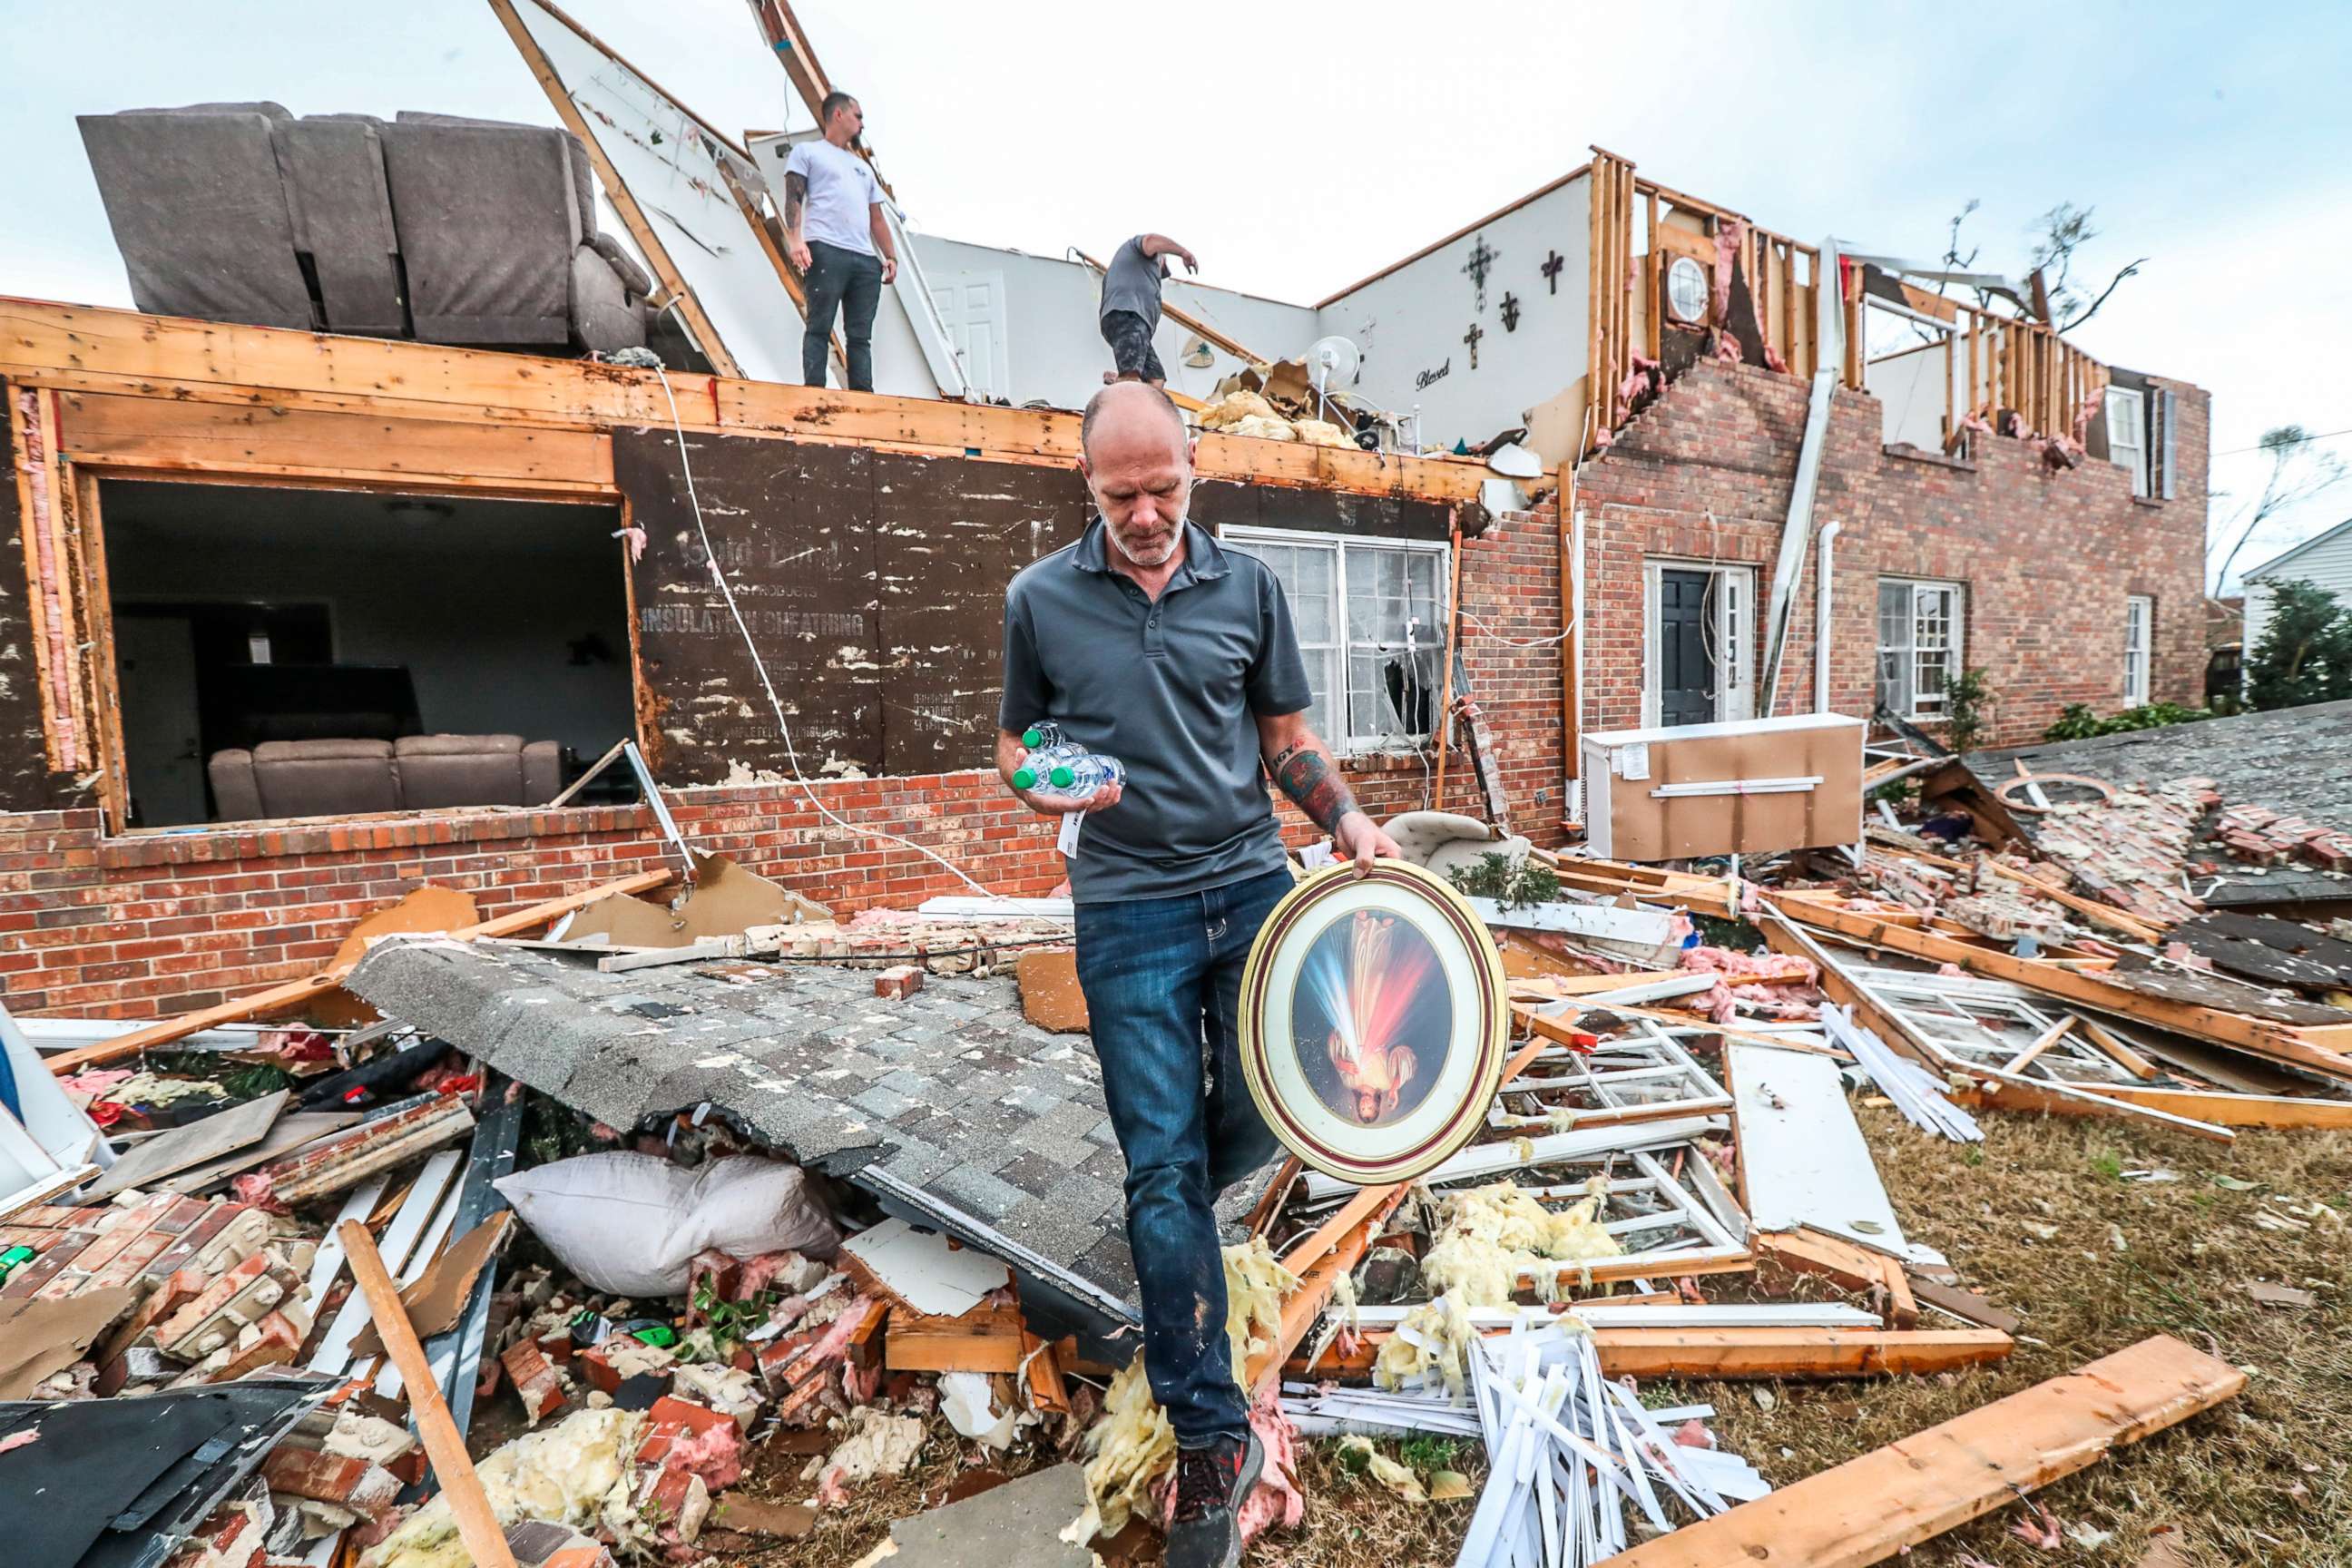 PHOTO: A man moves personal items from a home, in Newnan, in Coweta County, Ga. on March 26, 2021, after a tornado moved through the area.